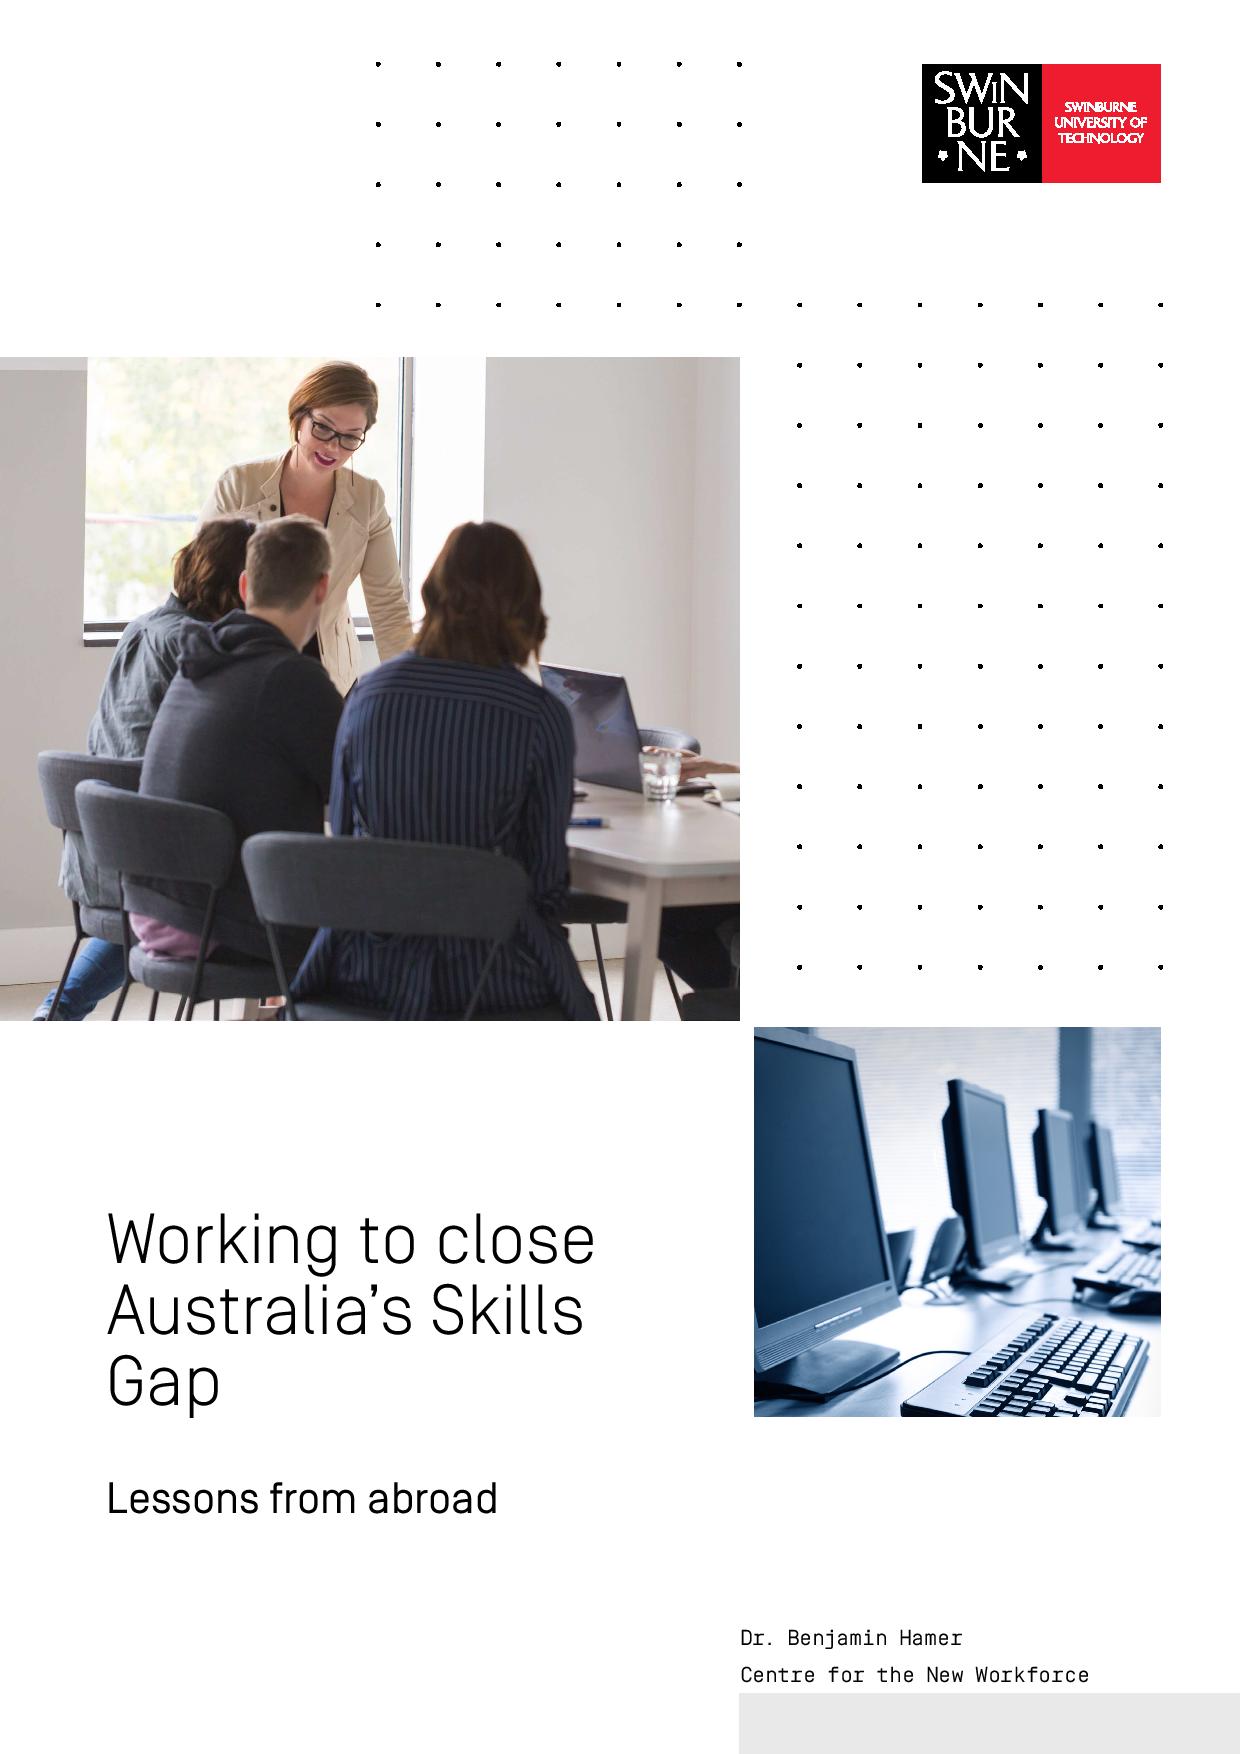 Working to close Australia's skills gap: Lessons from abroad